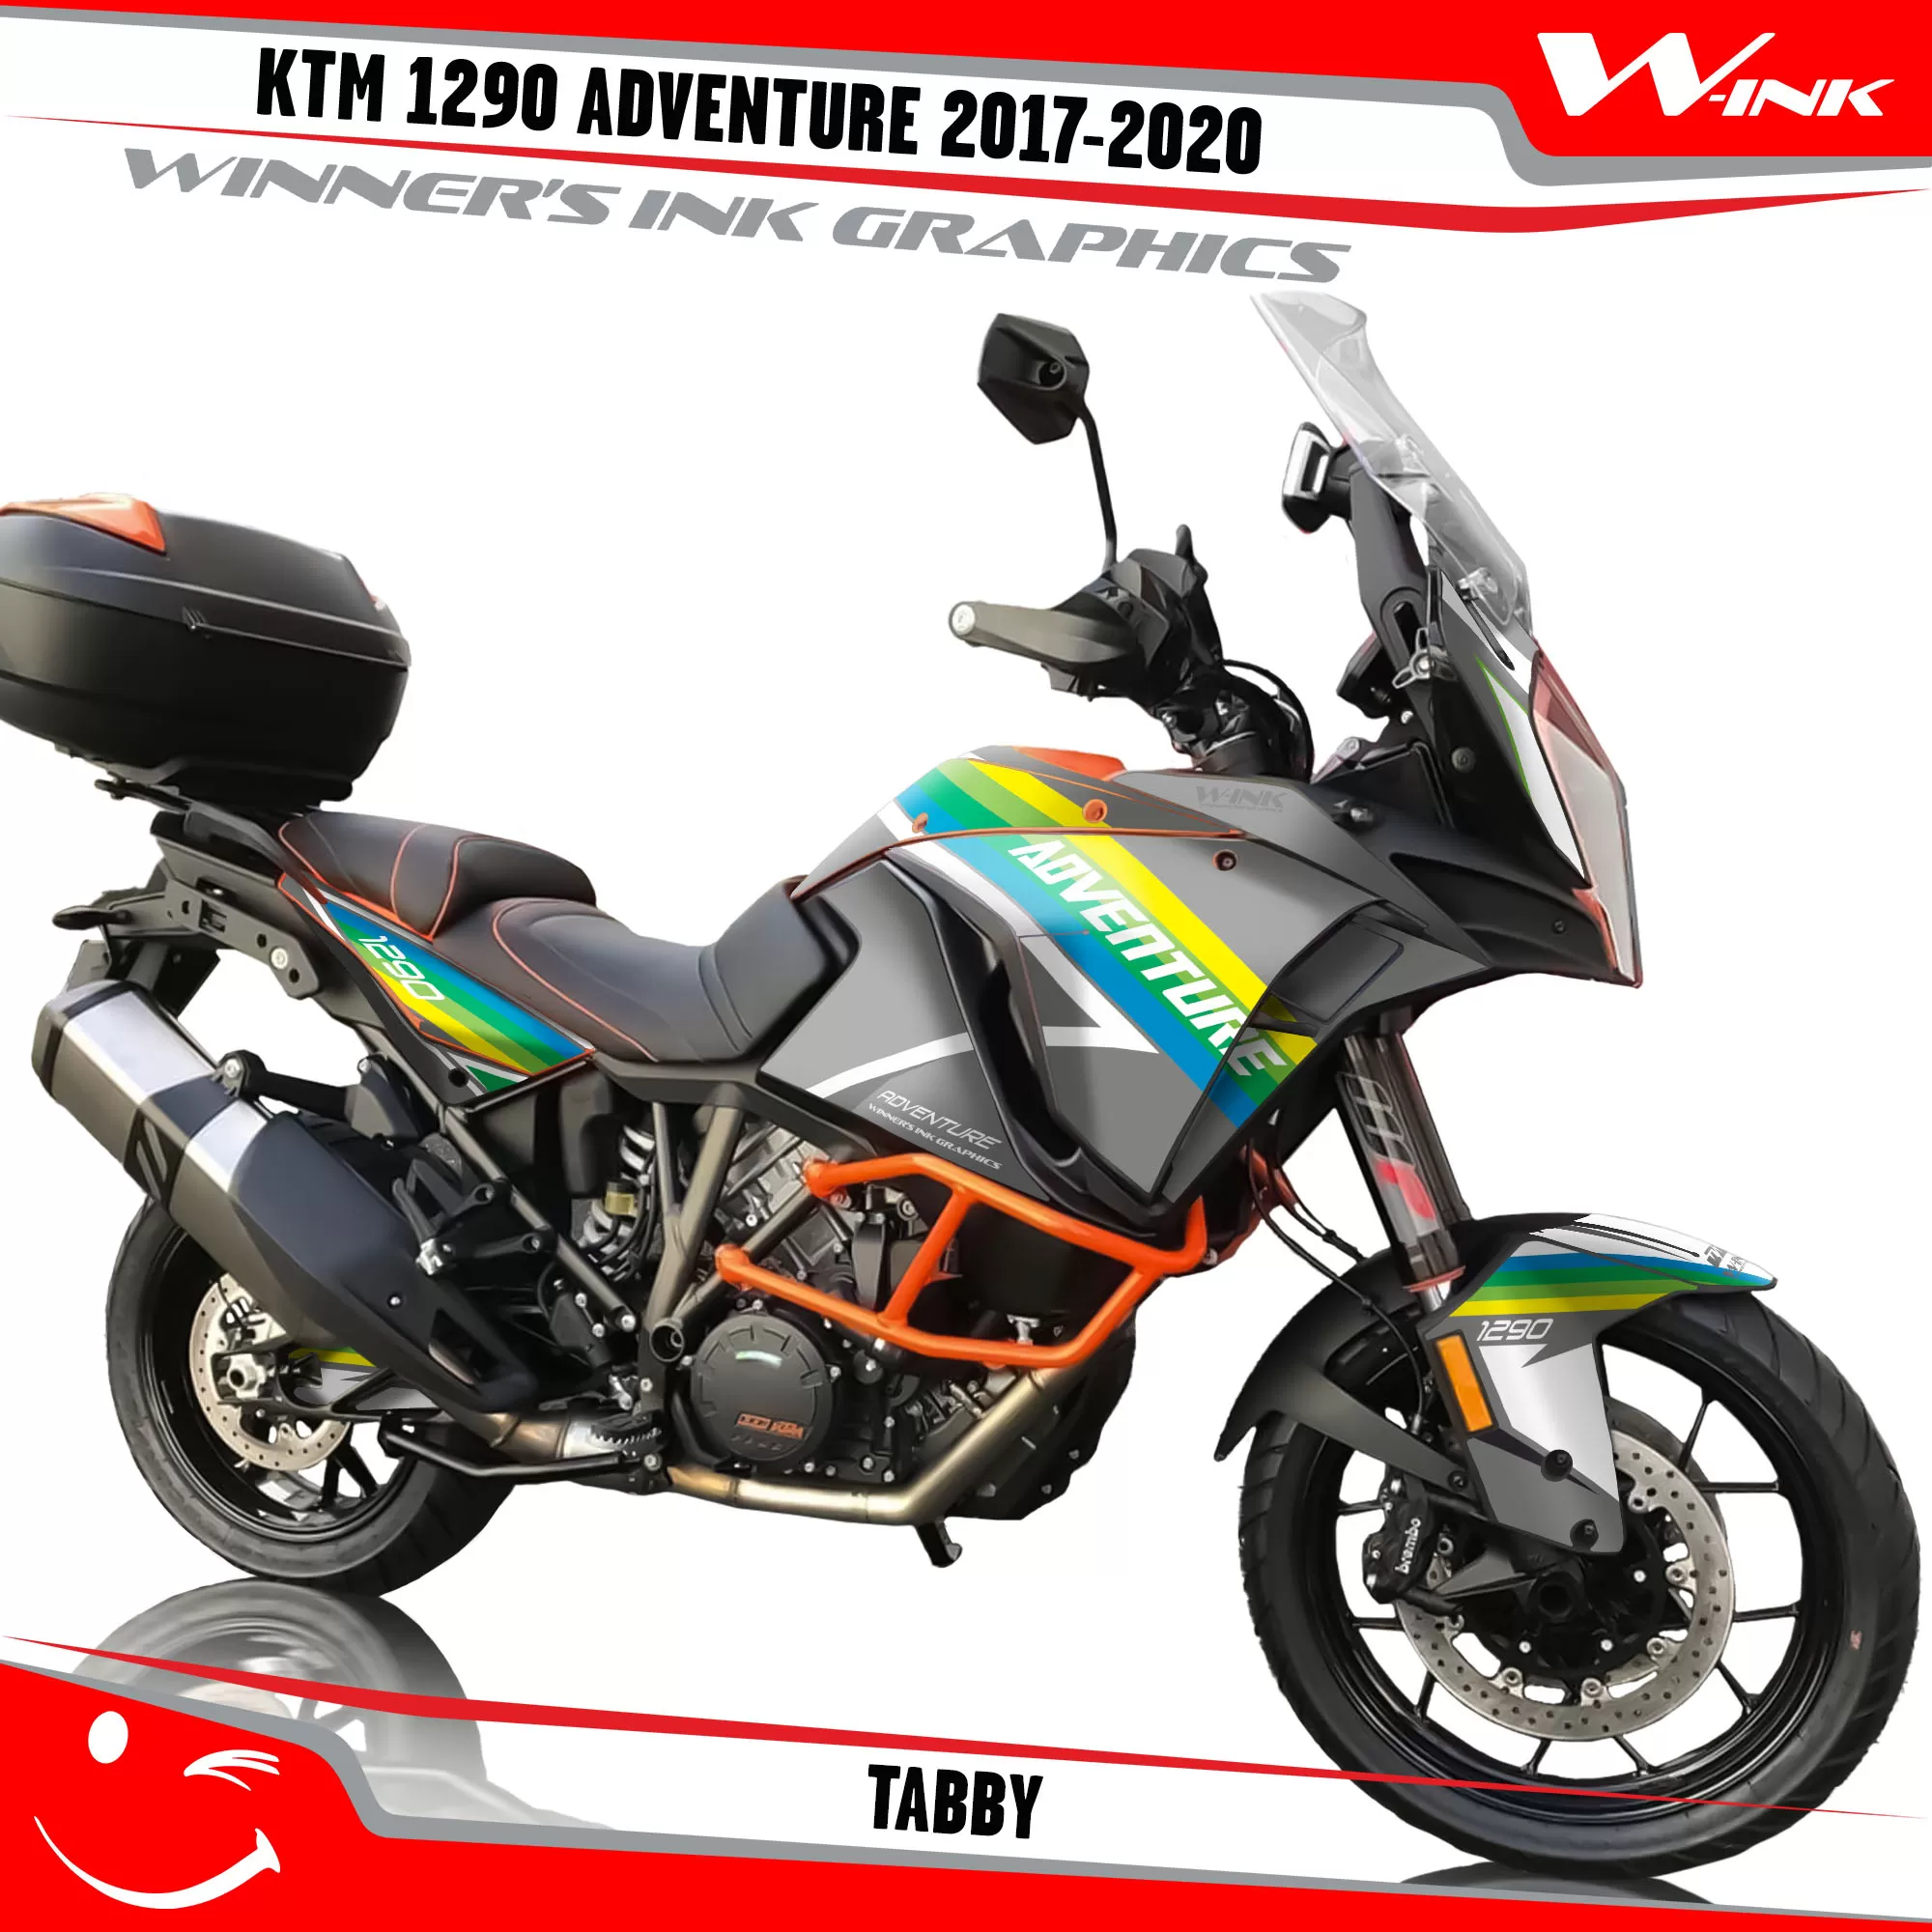 KTM-Adventure-1290-2017-2018-2019-2020-graphics-kit-and-decals-Tabby